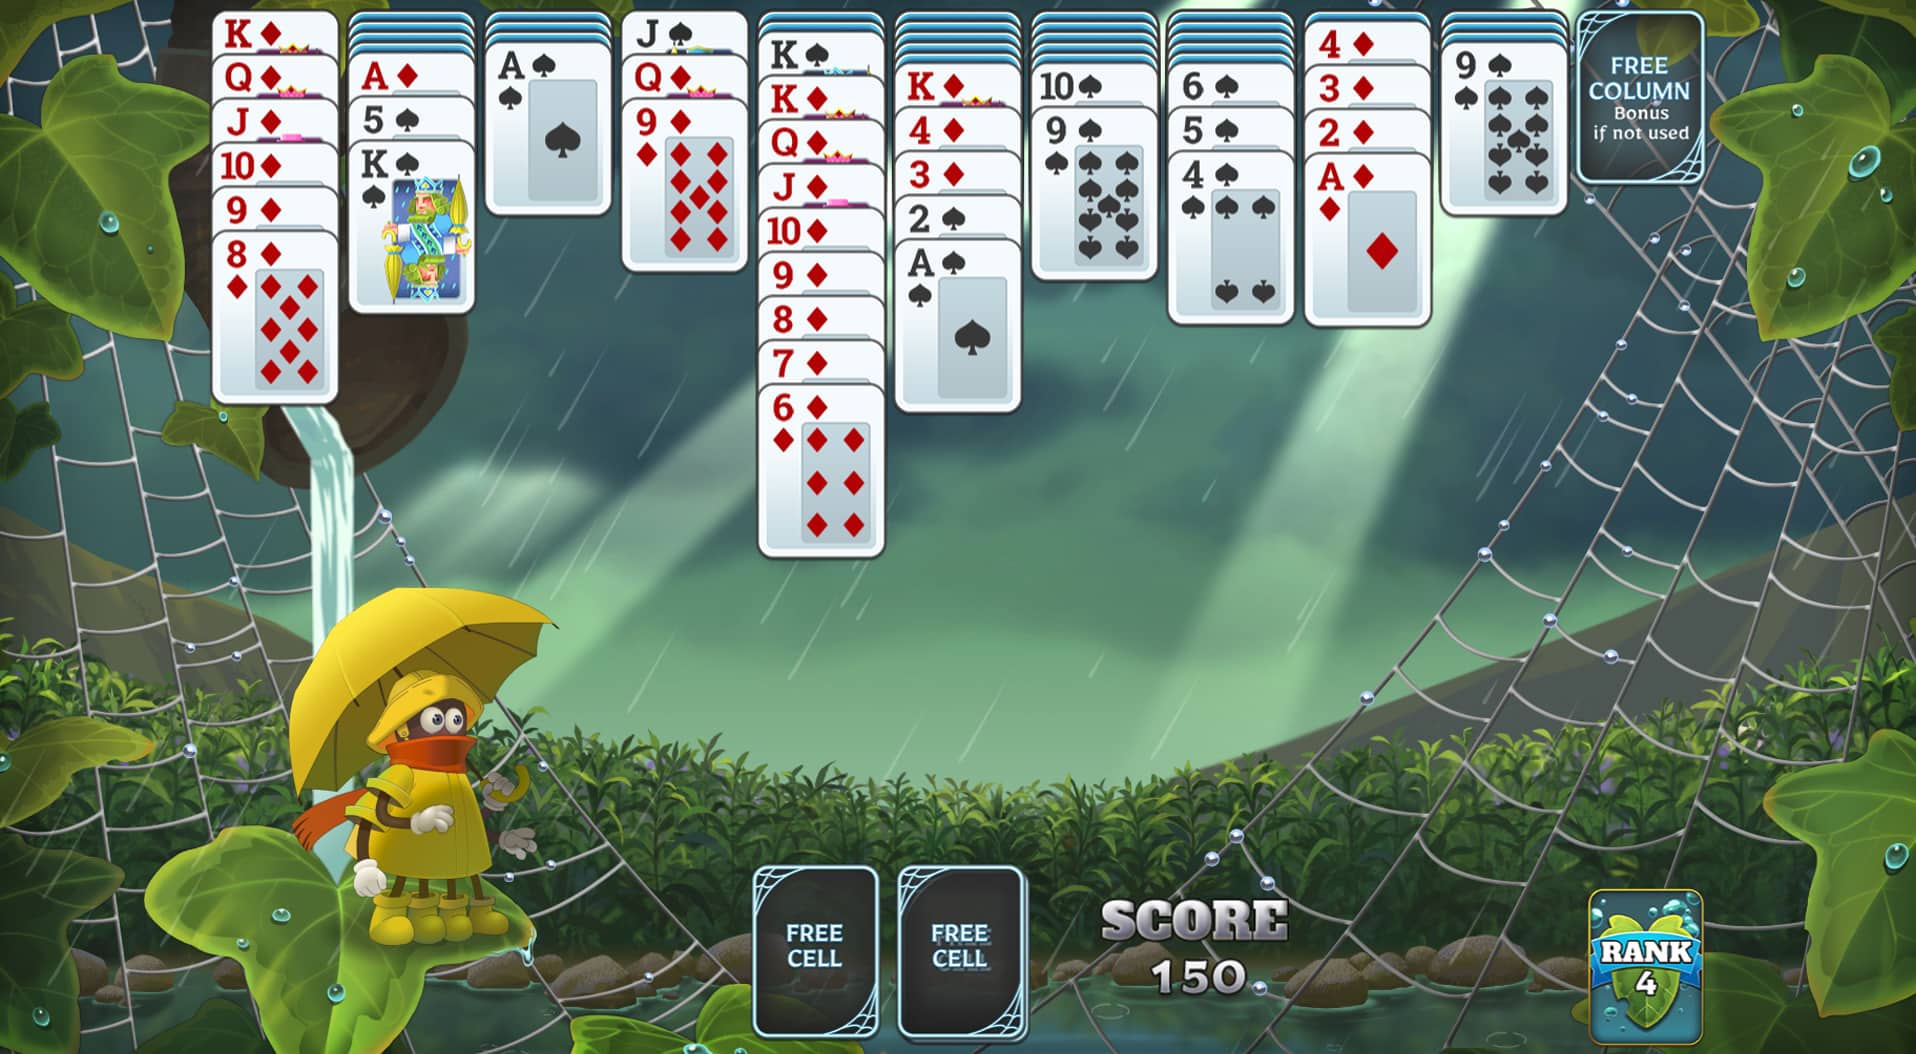 spider solitaire full screen online